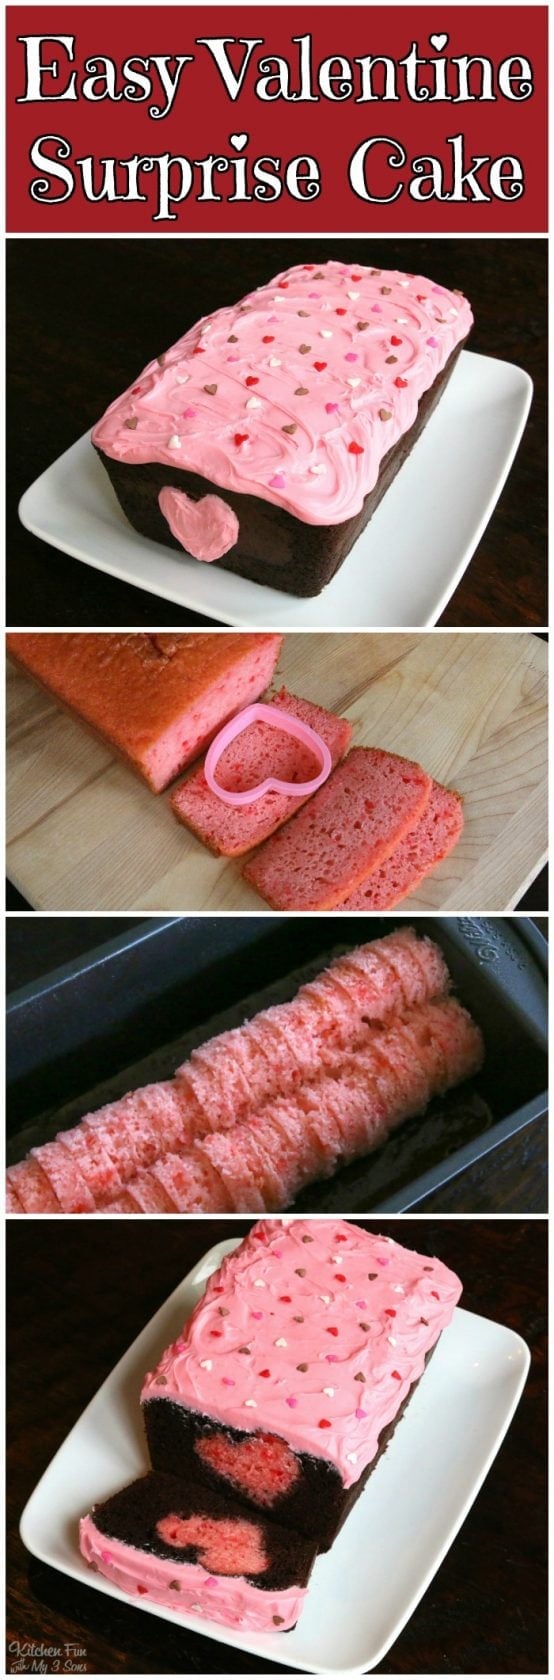 Valentine Surprise Cake...using a chocolate loaf cake! Such a fun & easy idea for Valentine's Day!